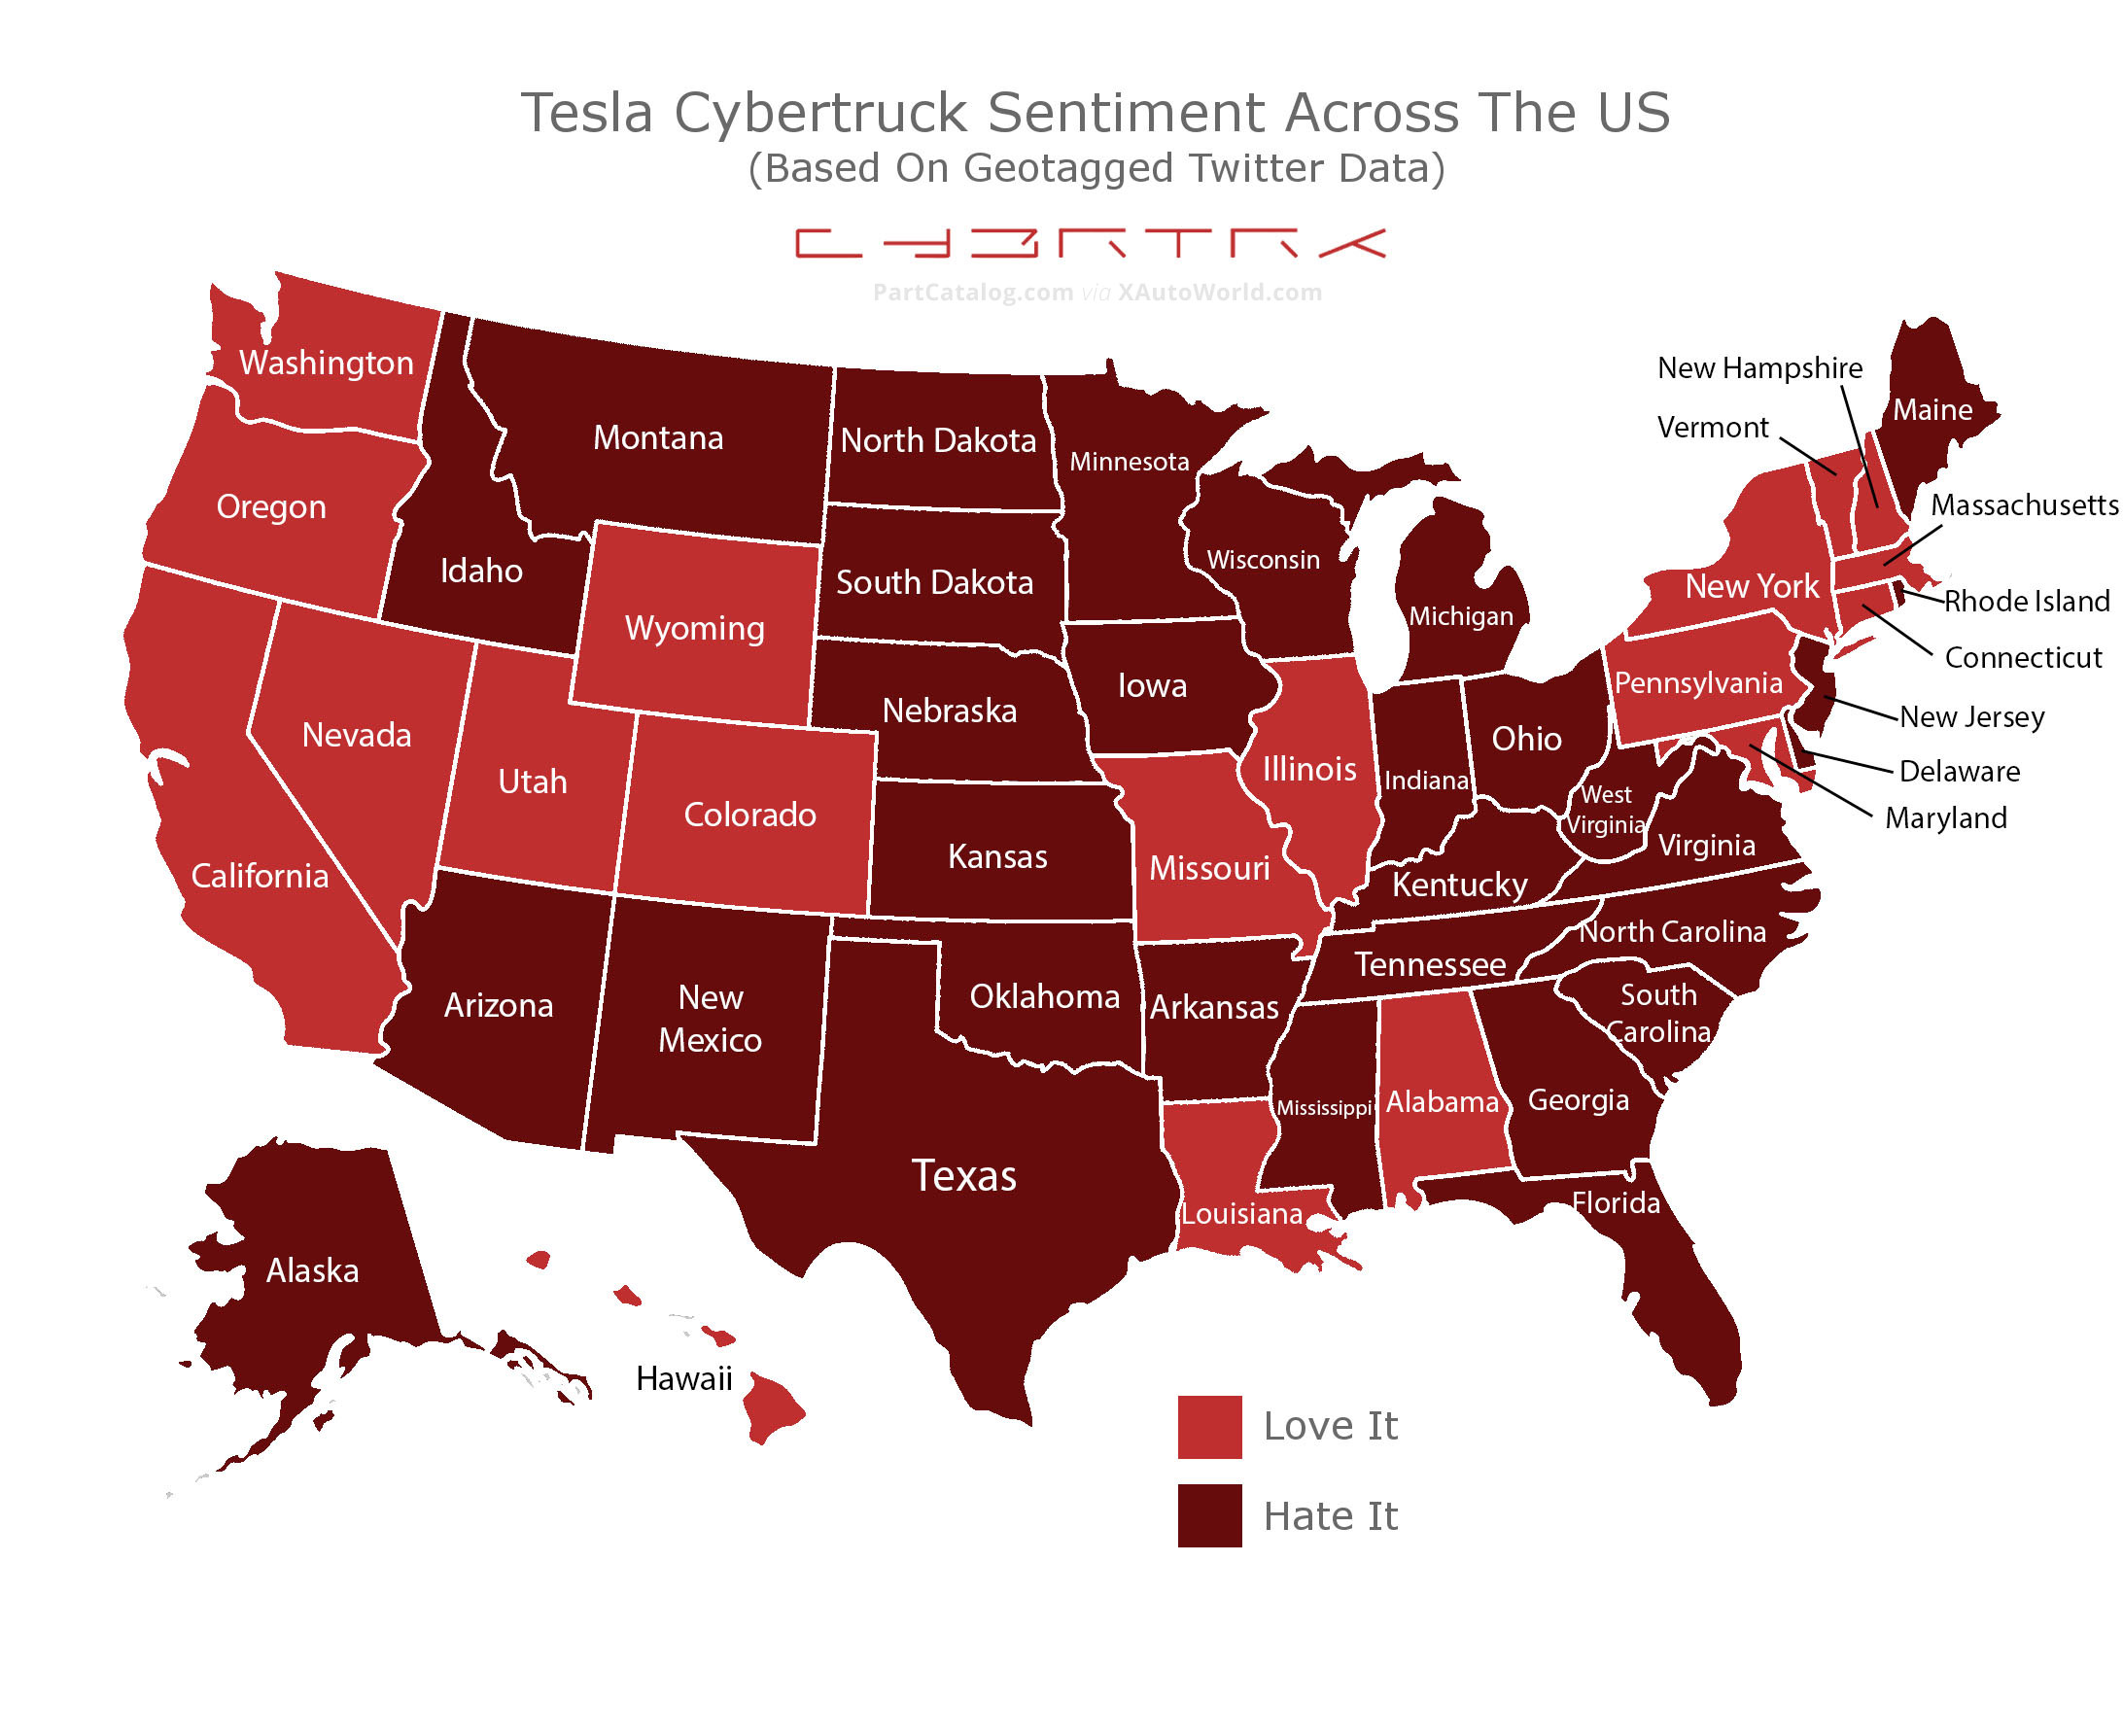 Tesla Cybertruck sentiment across the United States, love it = red, hate it = black.